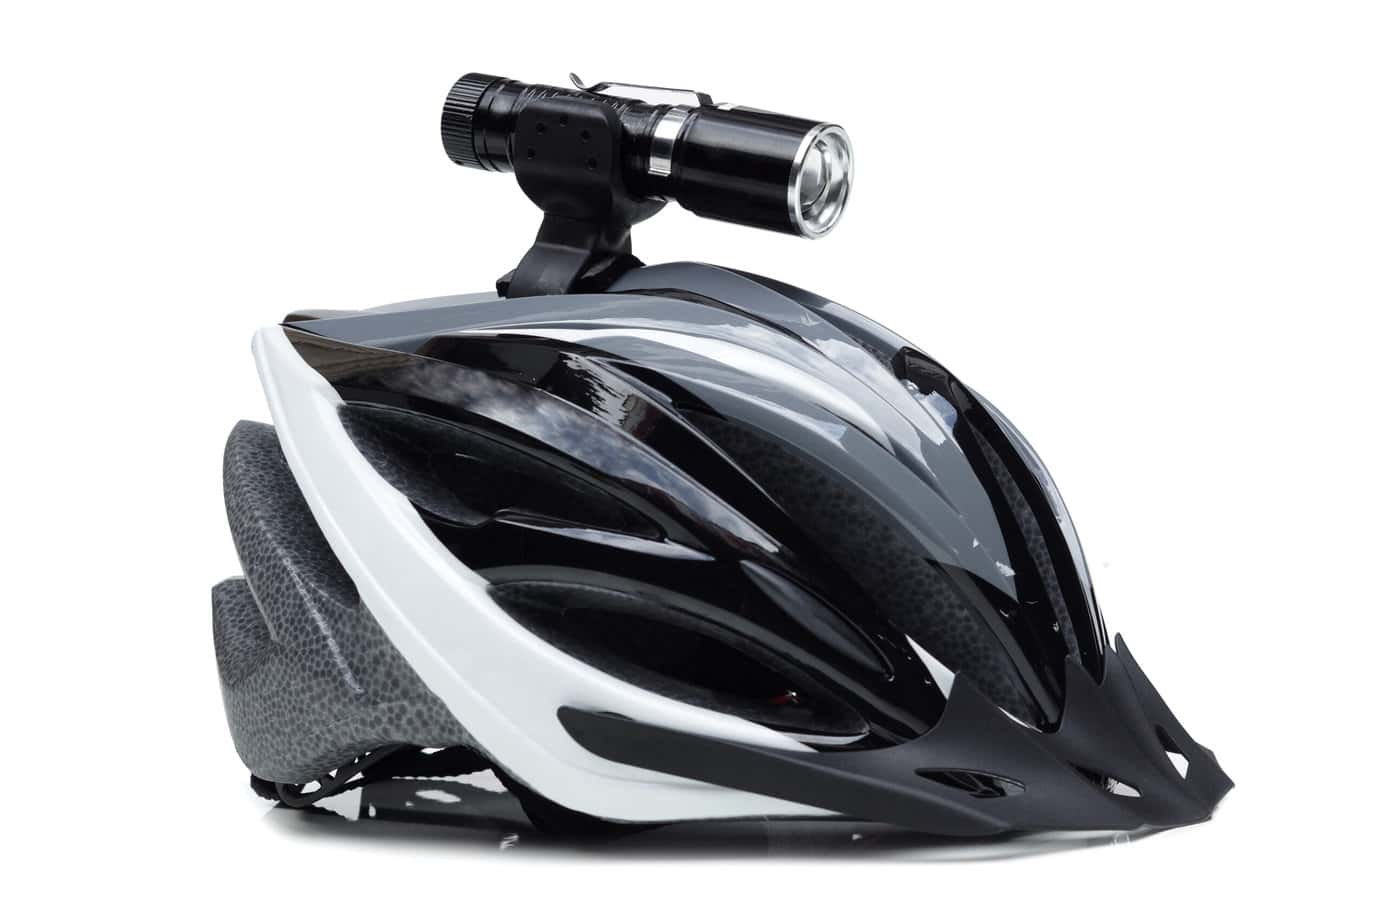 Fashion-Forward Helmet Accessories for Mountain Bikers Who Care